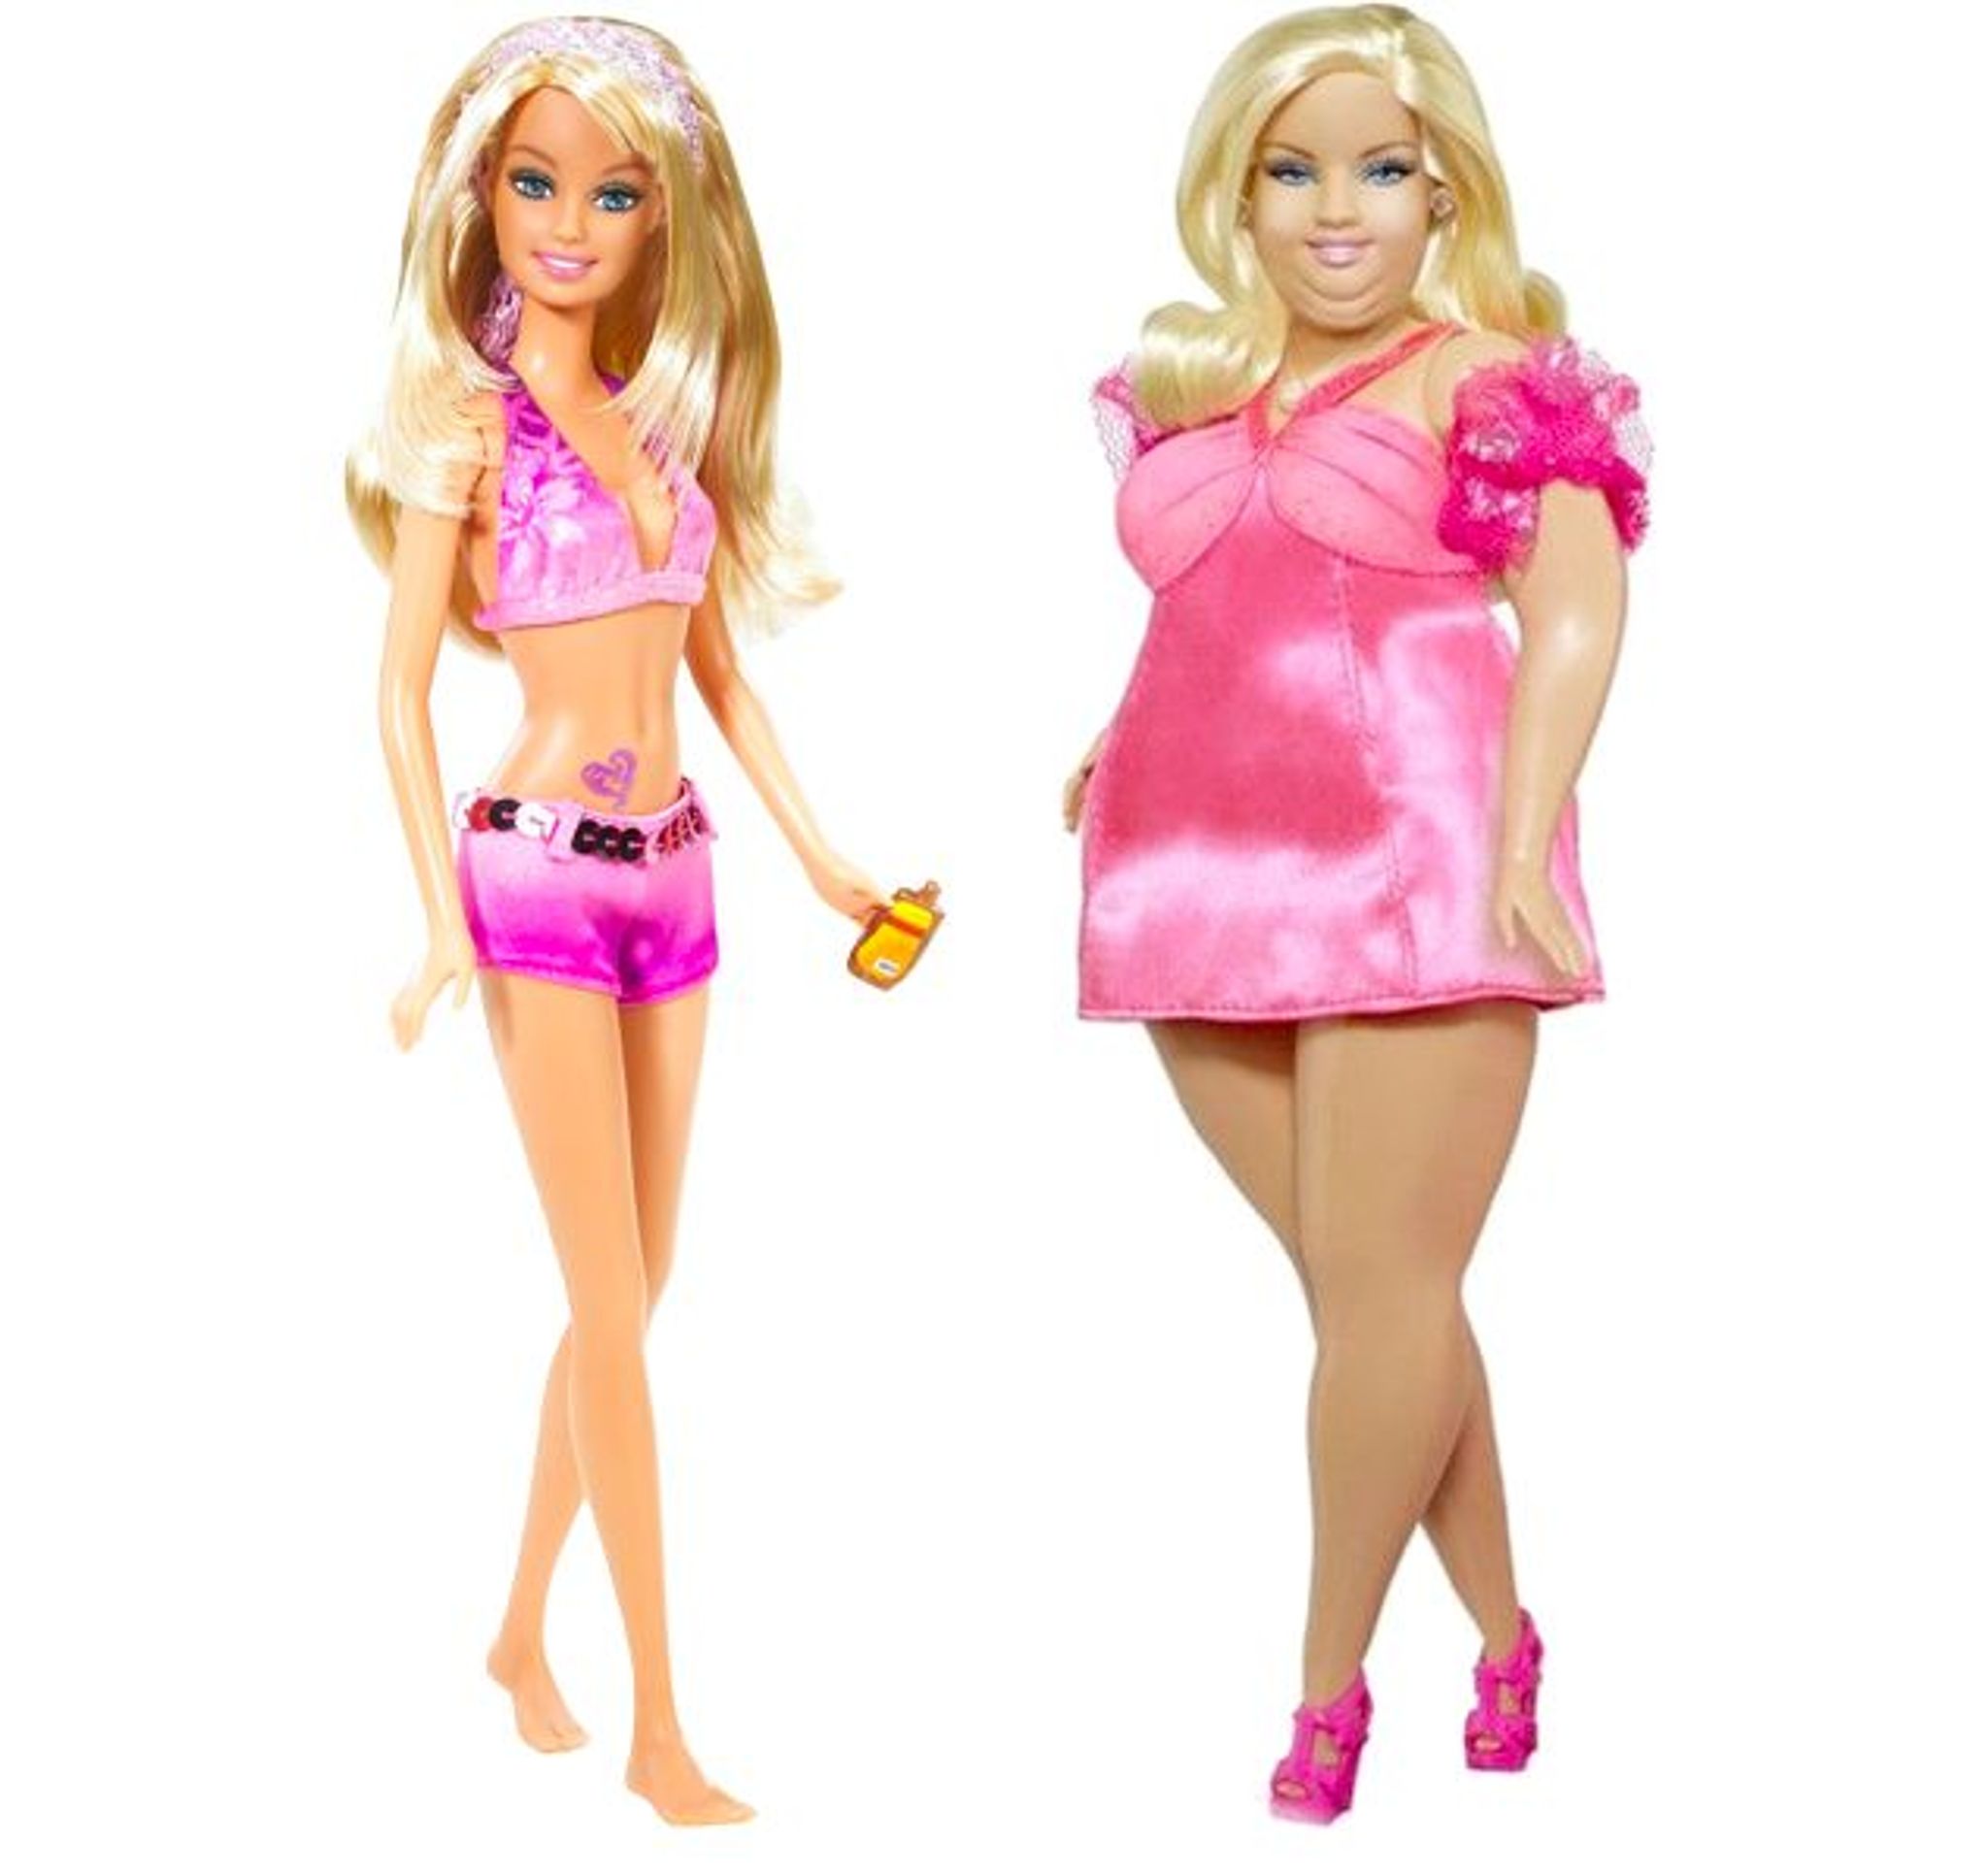 thin barbie and plus size barbie